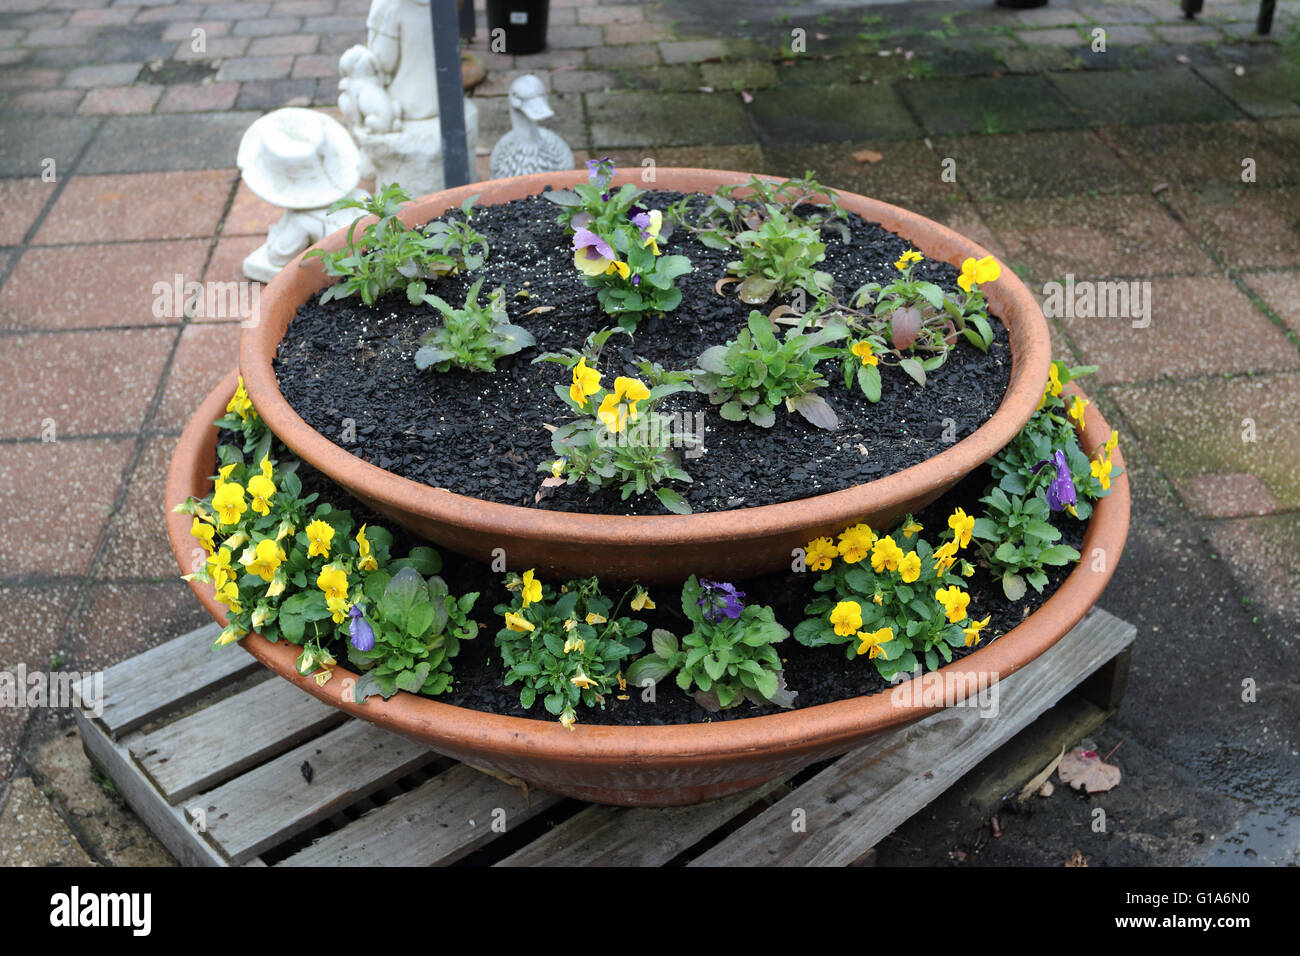 Growing garden pansy flowers in two tier pots Stock Photo